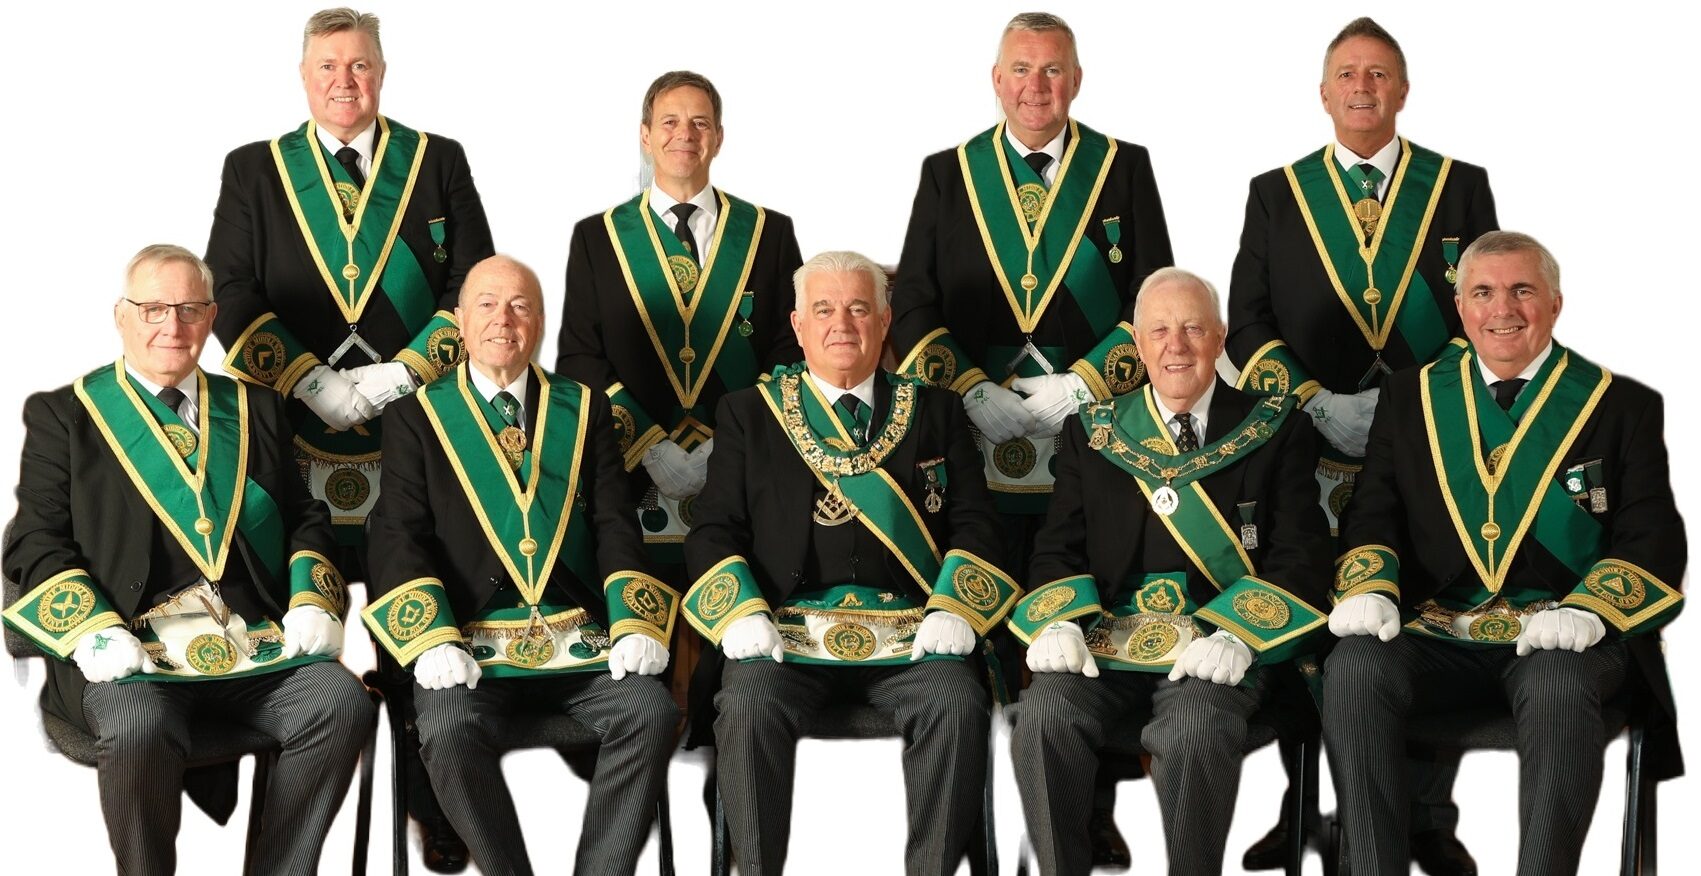 The Provincial Grand Lodge of Lanarkshire Middle Ward